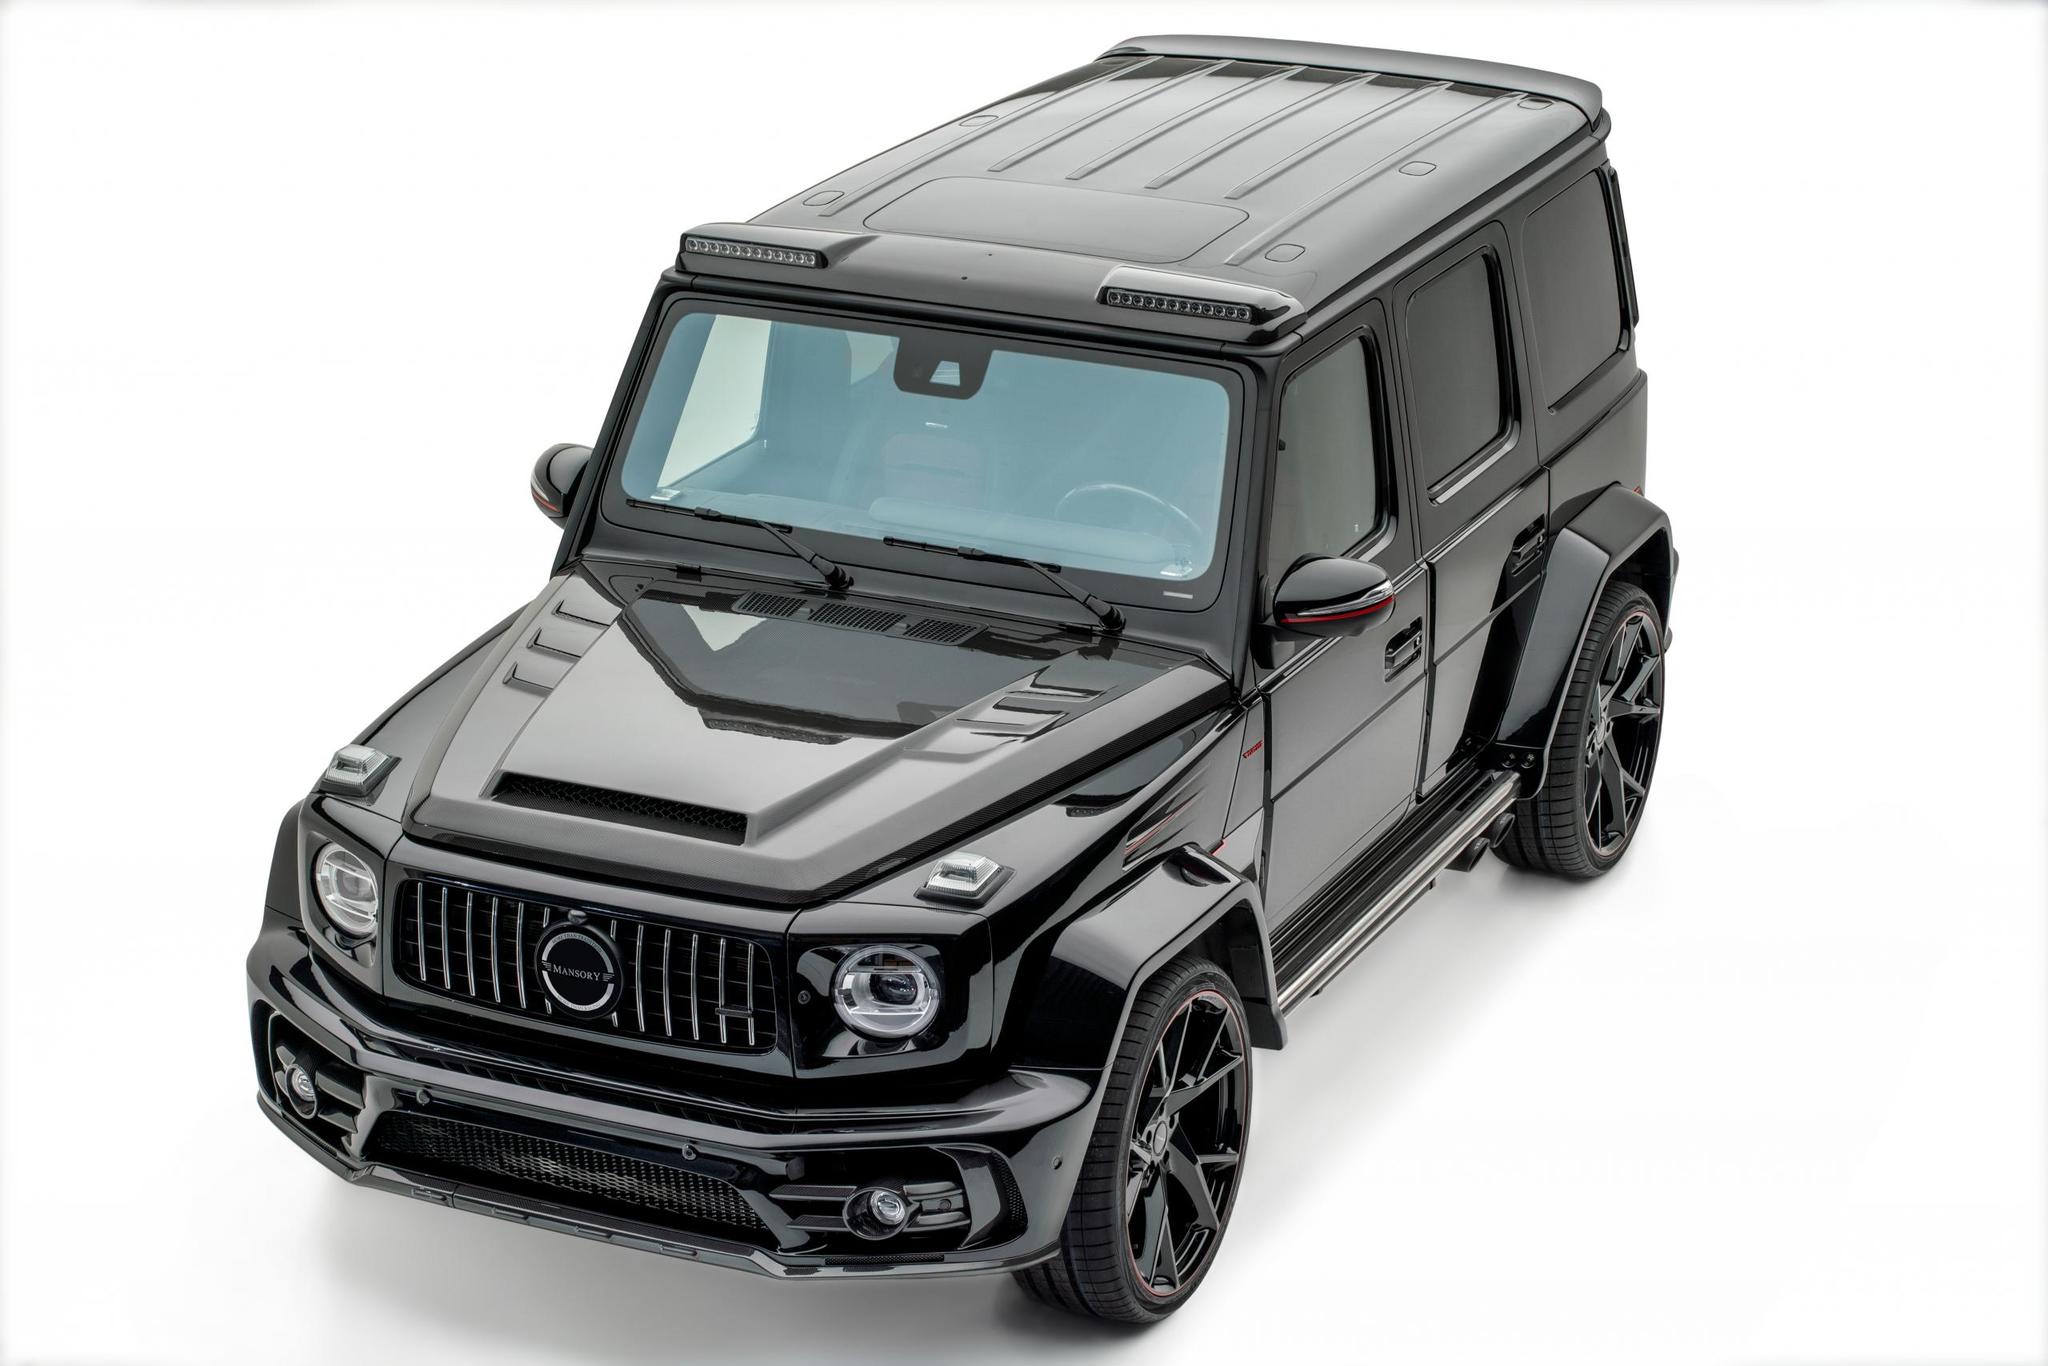 Mansory body kit for Mercedes G-class carbon